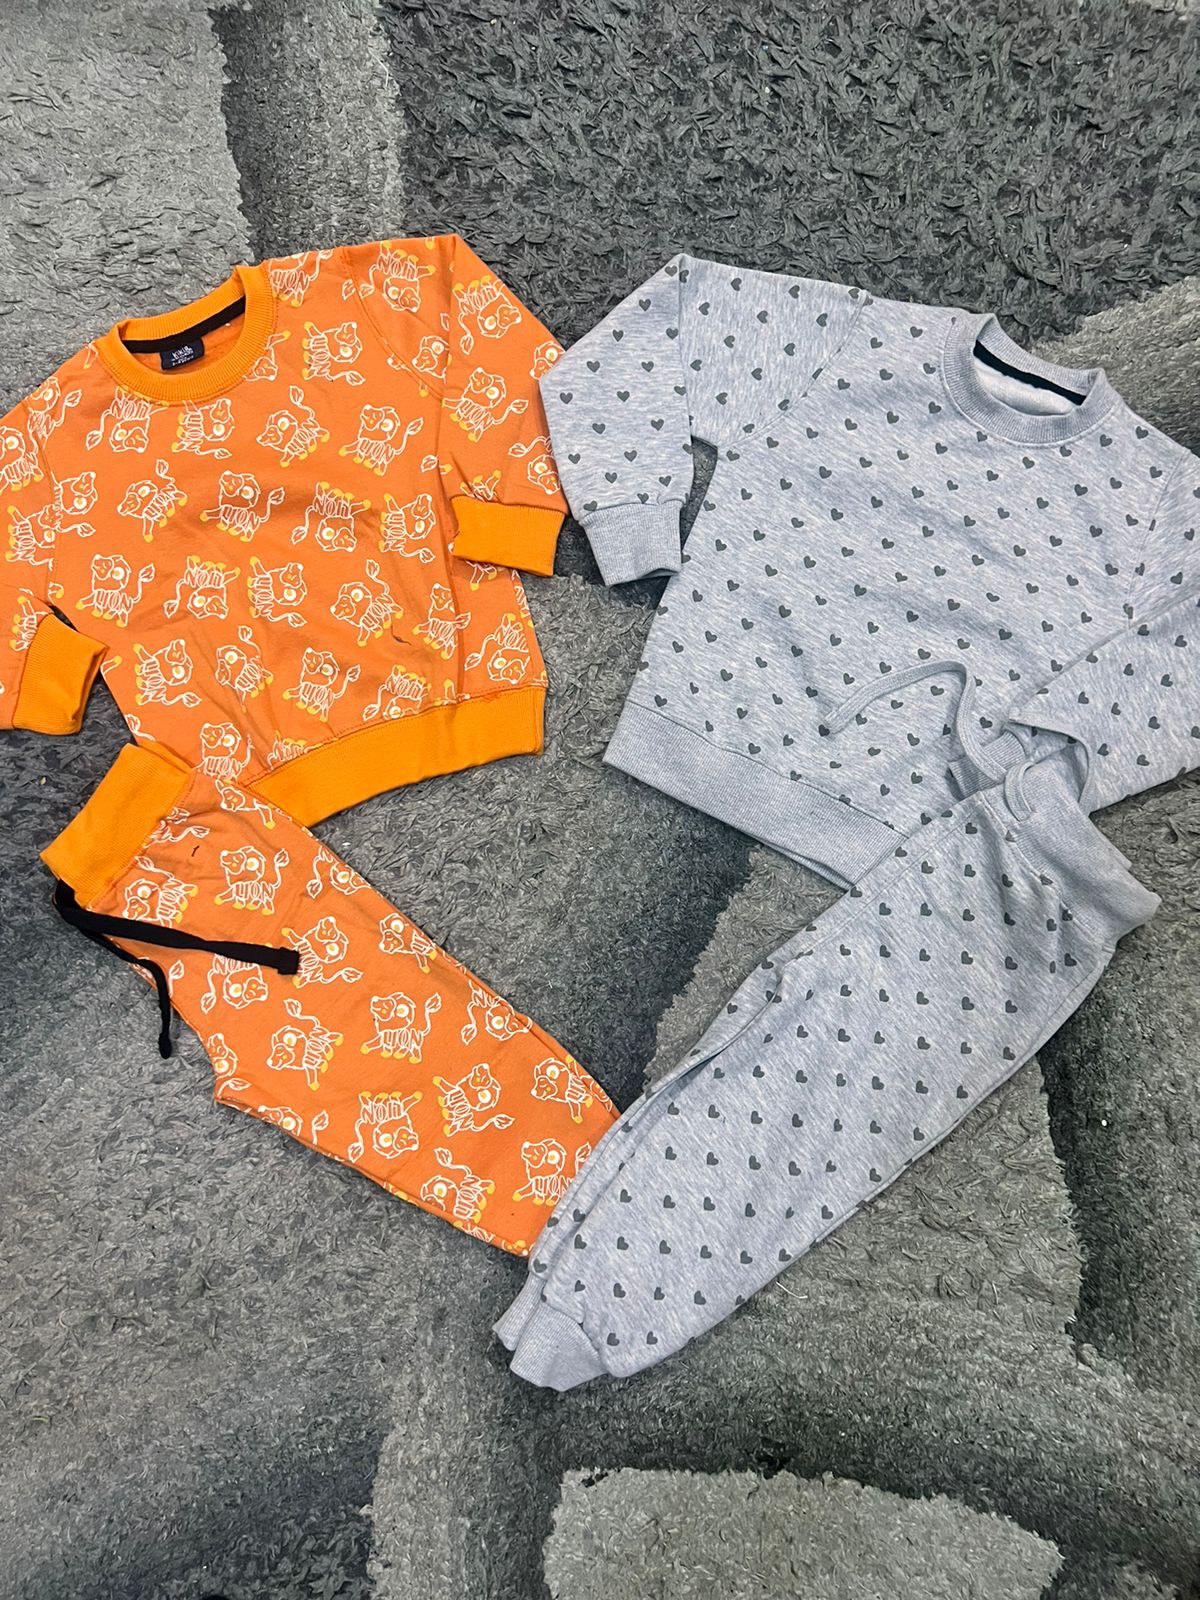 Kids Girls Boys Winter Gala Pack of 2 Fleece Warm Suits Pack of 2: 3-4 Year, Orange and Gray Hearts